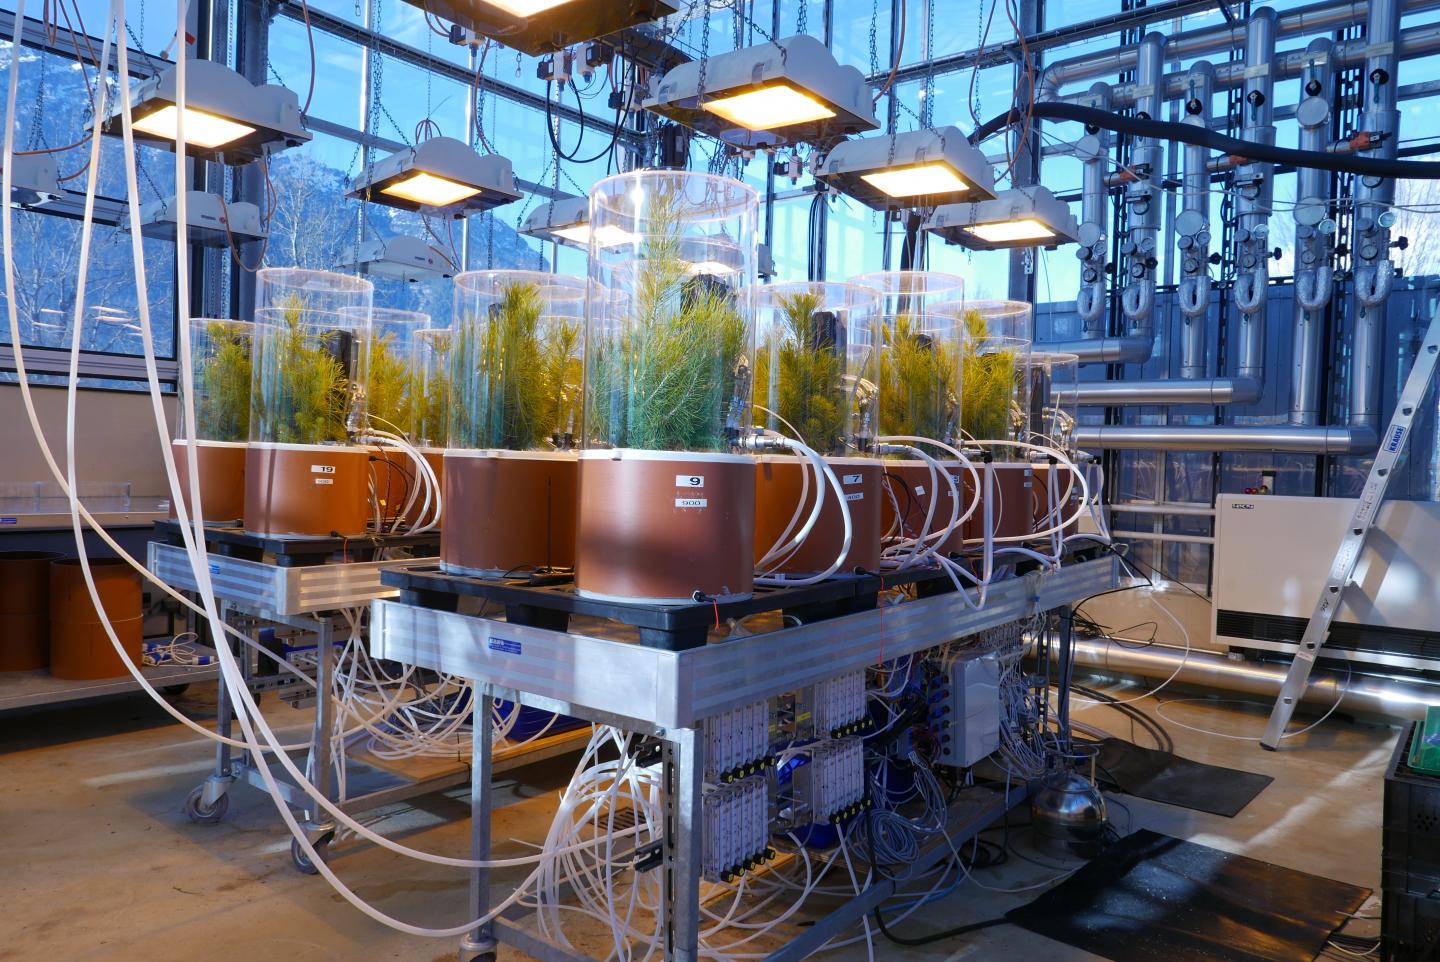 Experimental setup: In high-tech plant chambers